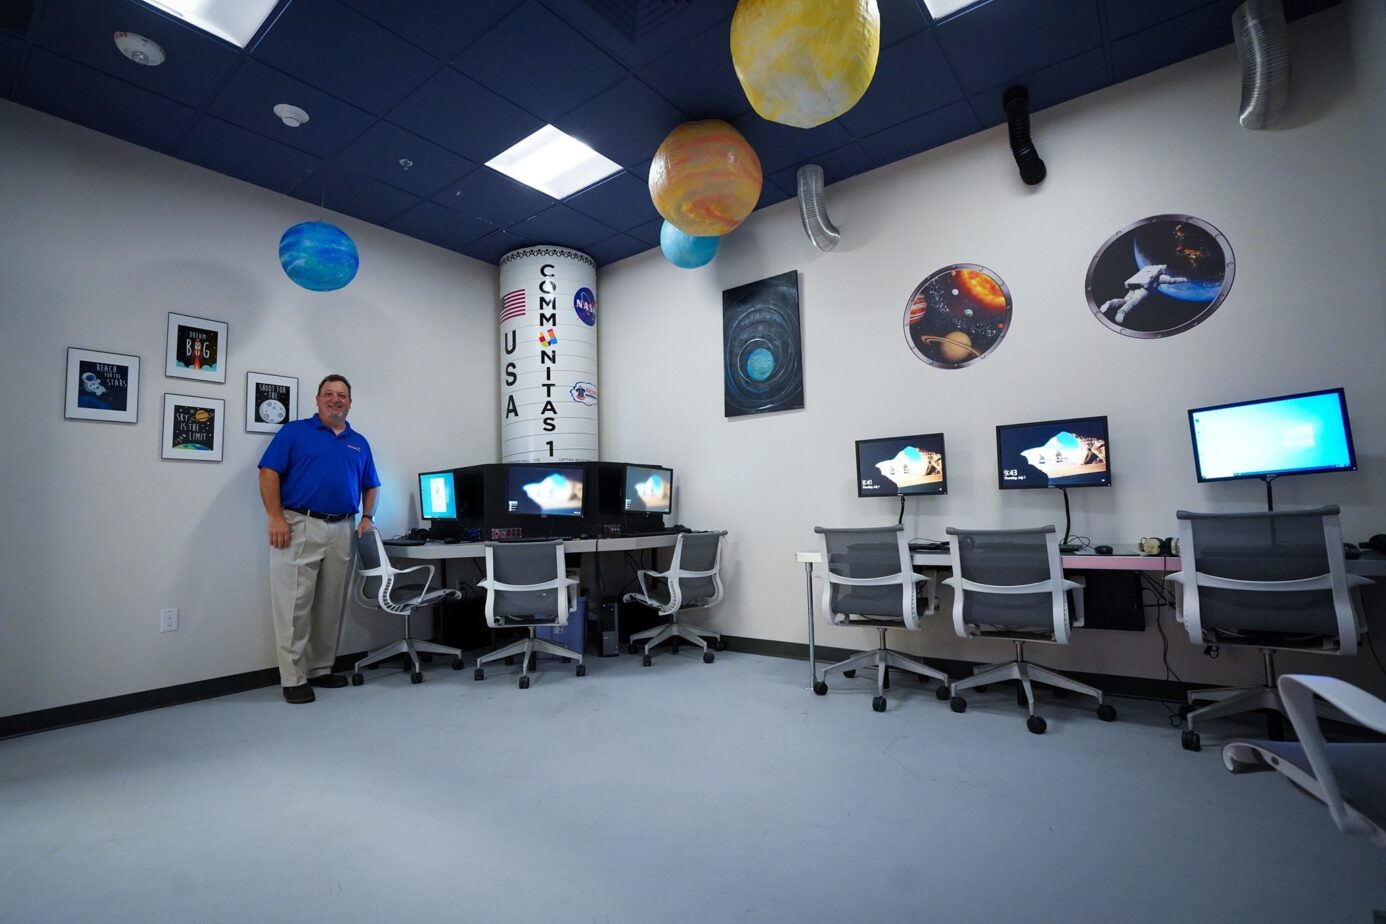 Woburn's new Computer Lab, designed and executed by Prosper Solutions!